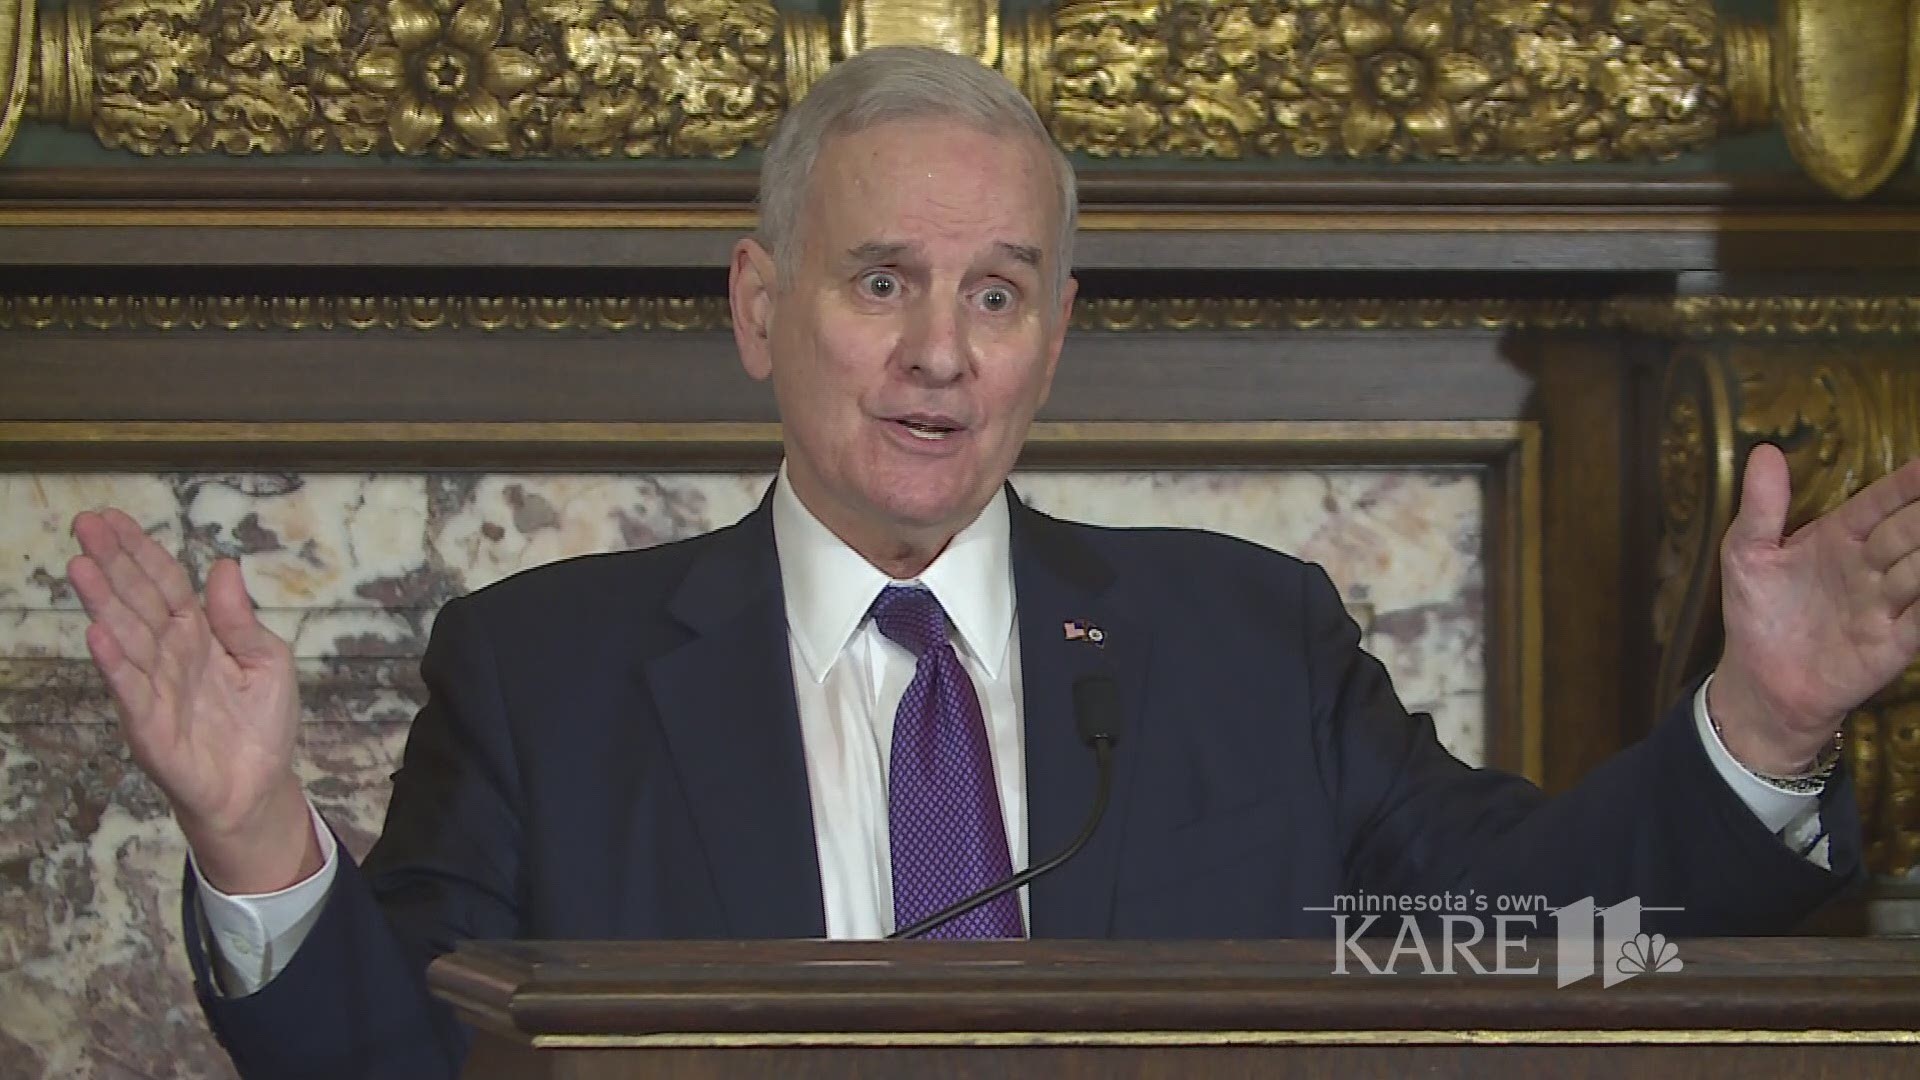 It was inevitable someone would ask Gov. Mark Dayton about the story that captivated Minnesotans this week -- the mysterious discovery of a mummified monkey in the former Dayton's Dept. Store building in downtown Minneapolis. It was the flagship location